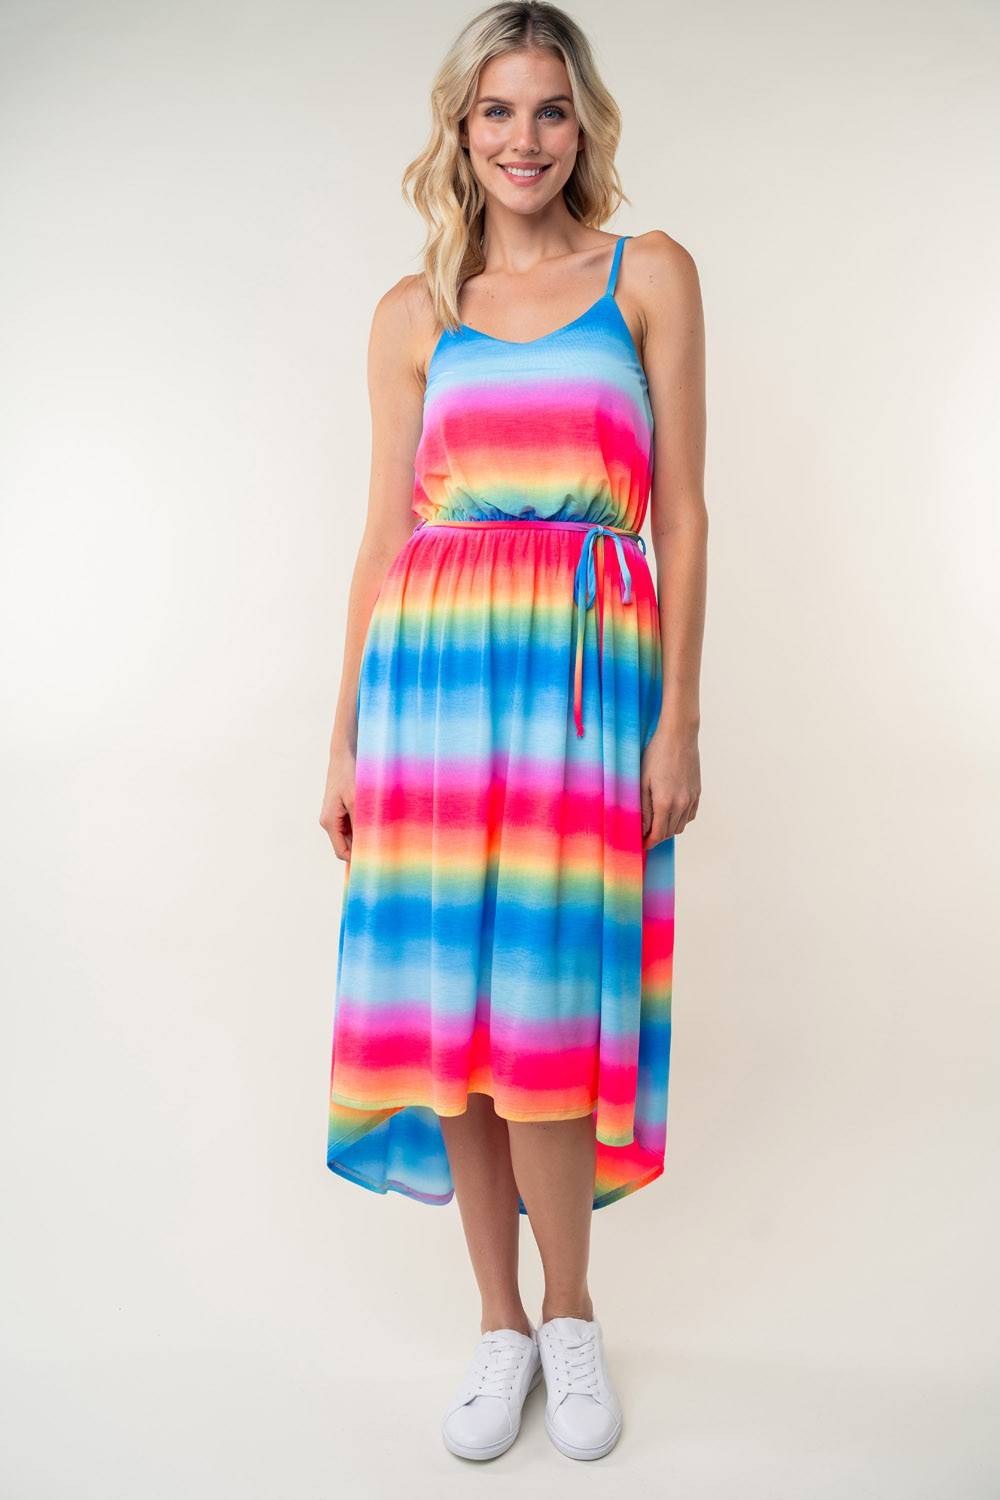 a woman wearing a multicolored dress